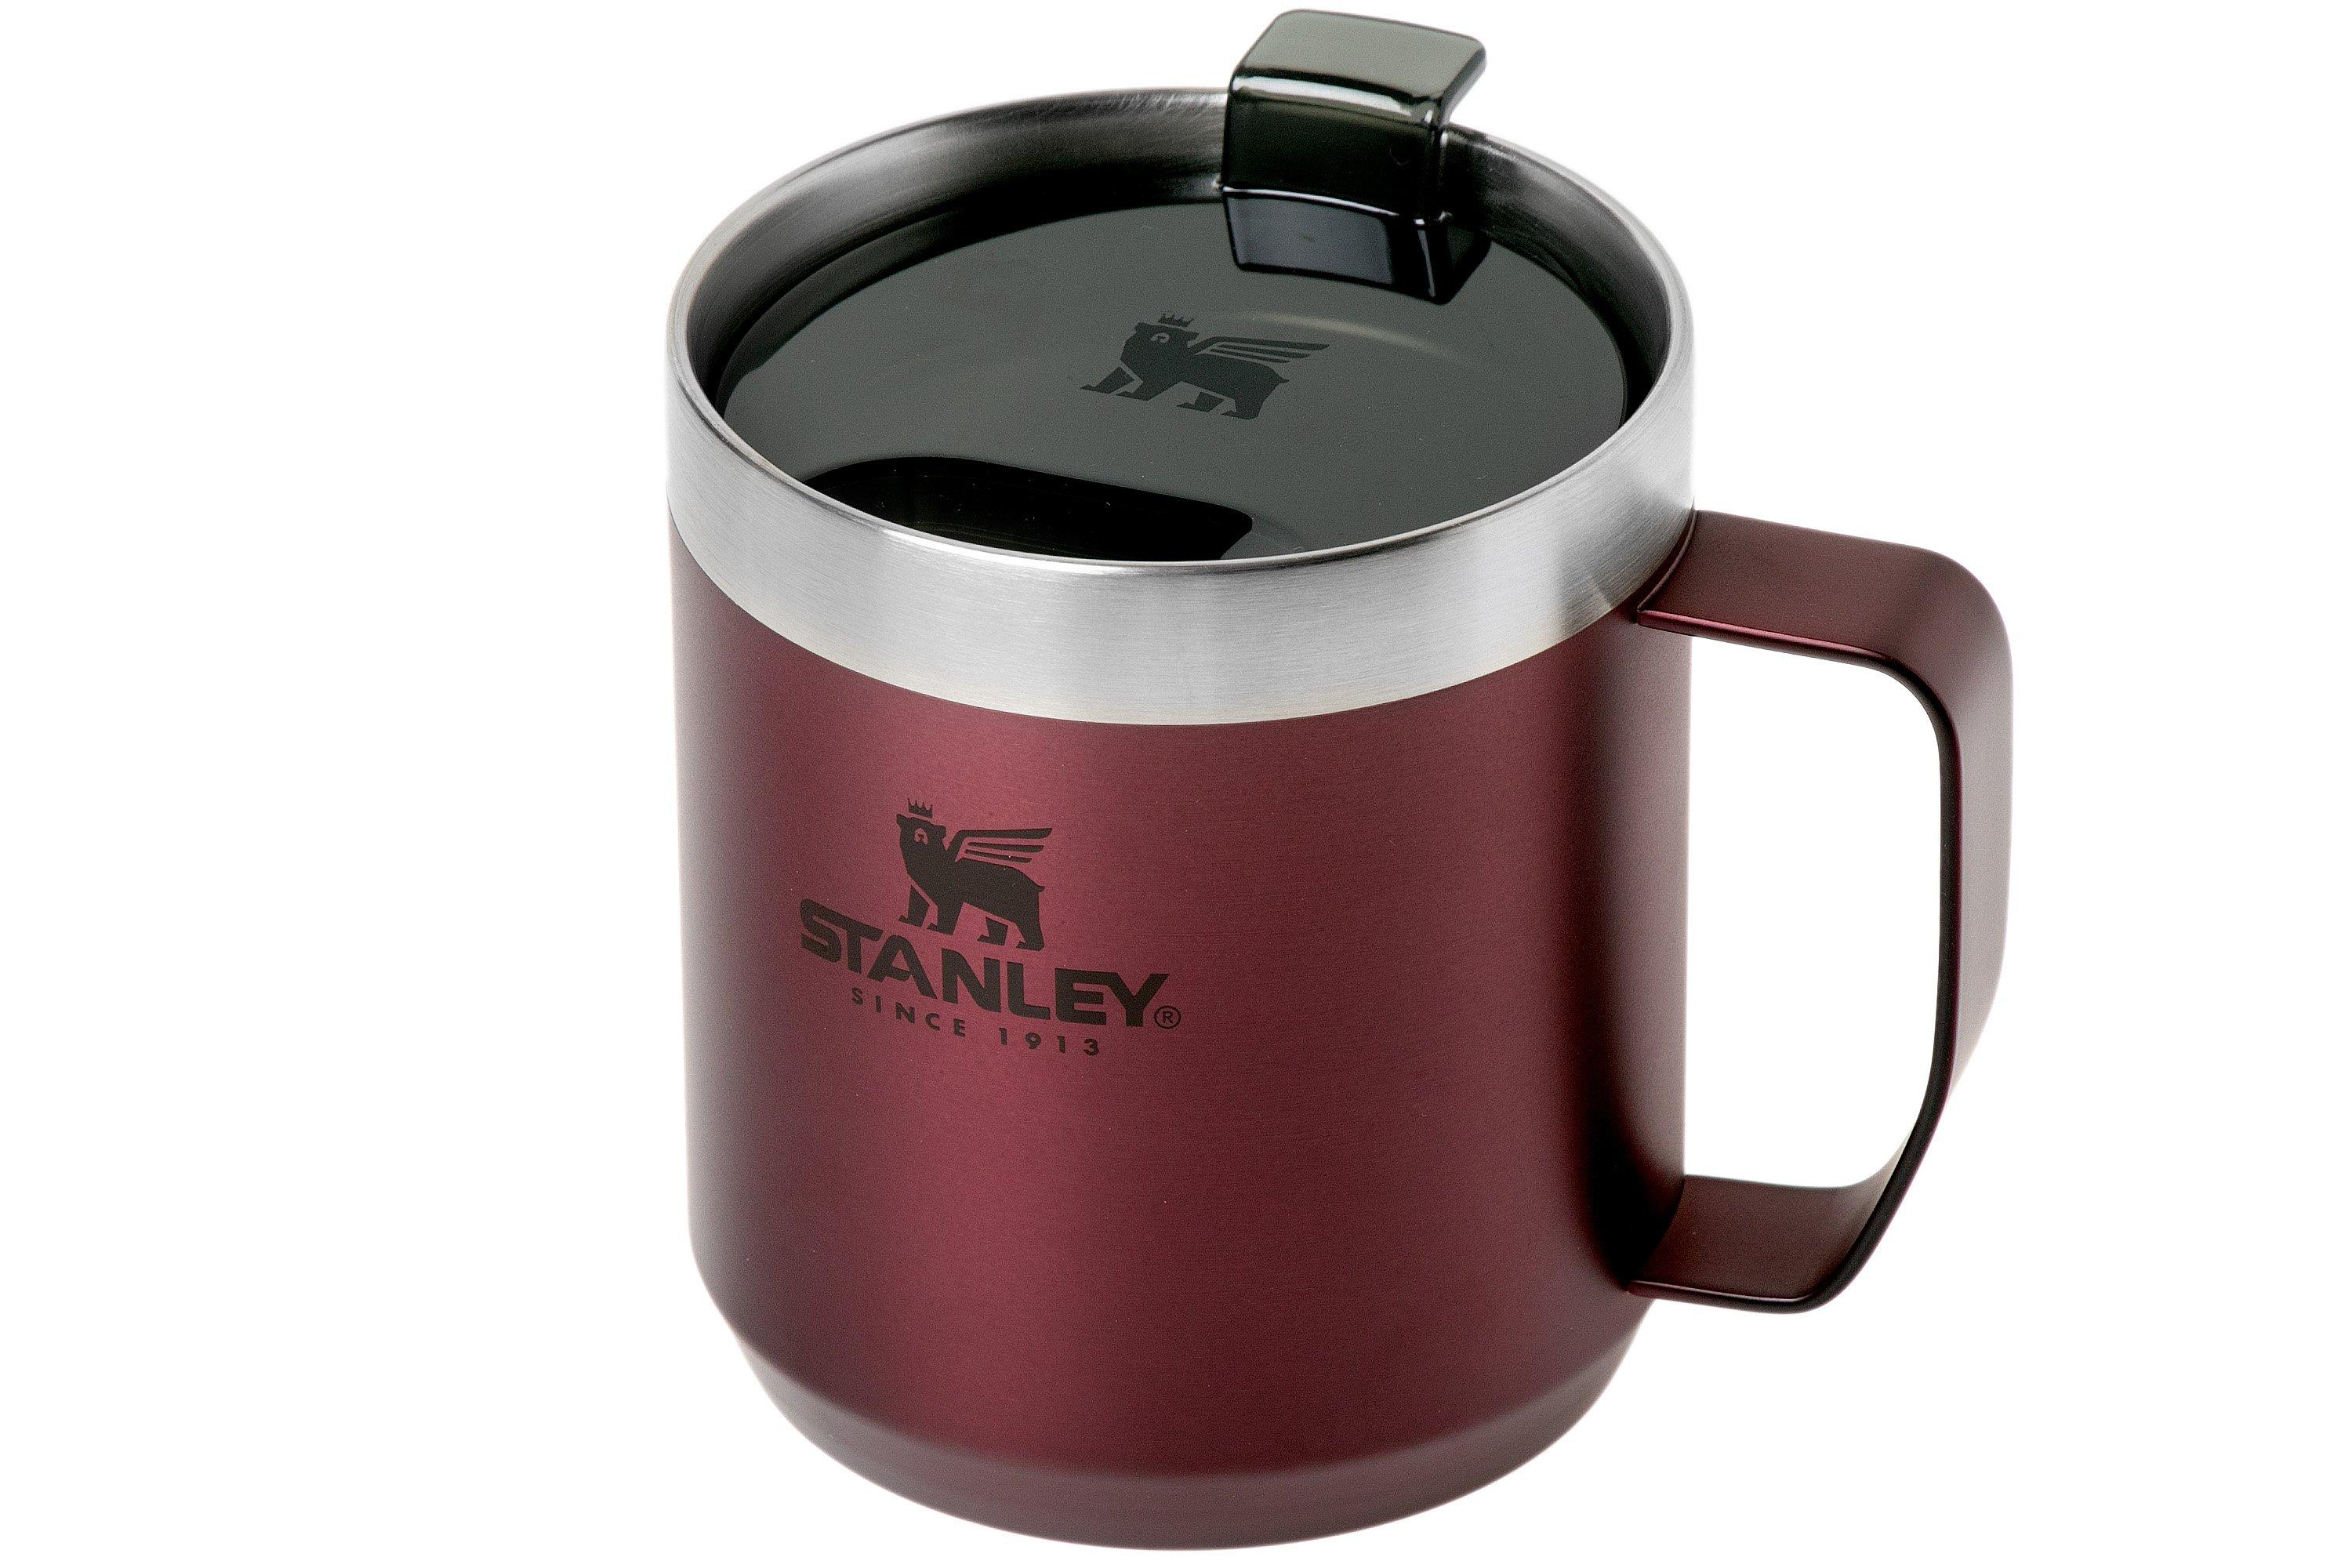 Stanley The Legendary Camp mug 350 ml - Wine  Advantageously shopping at